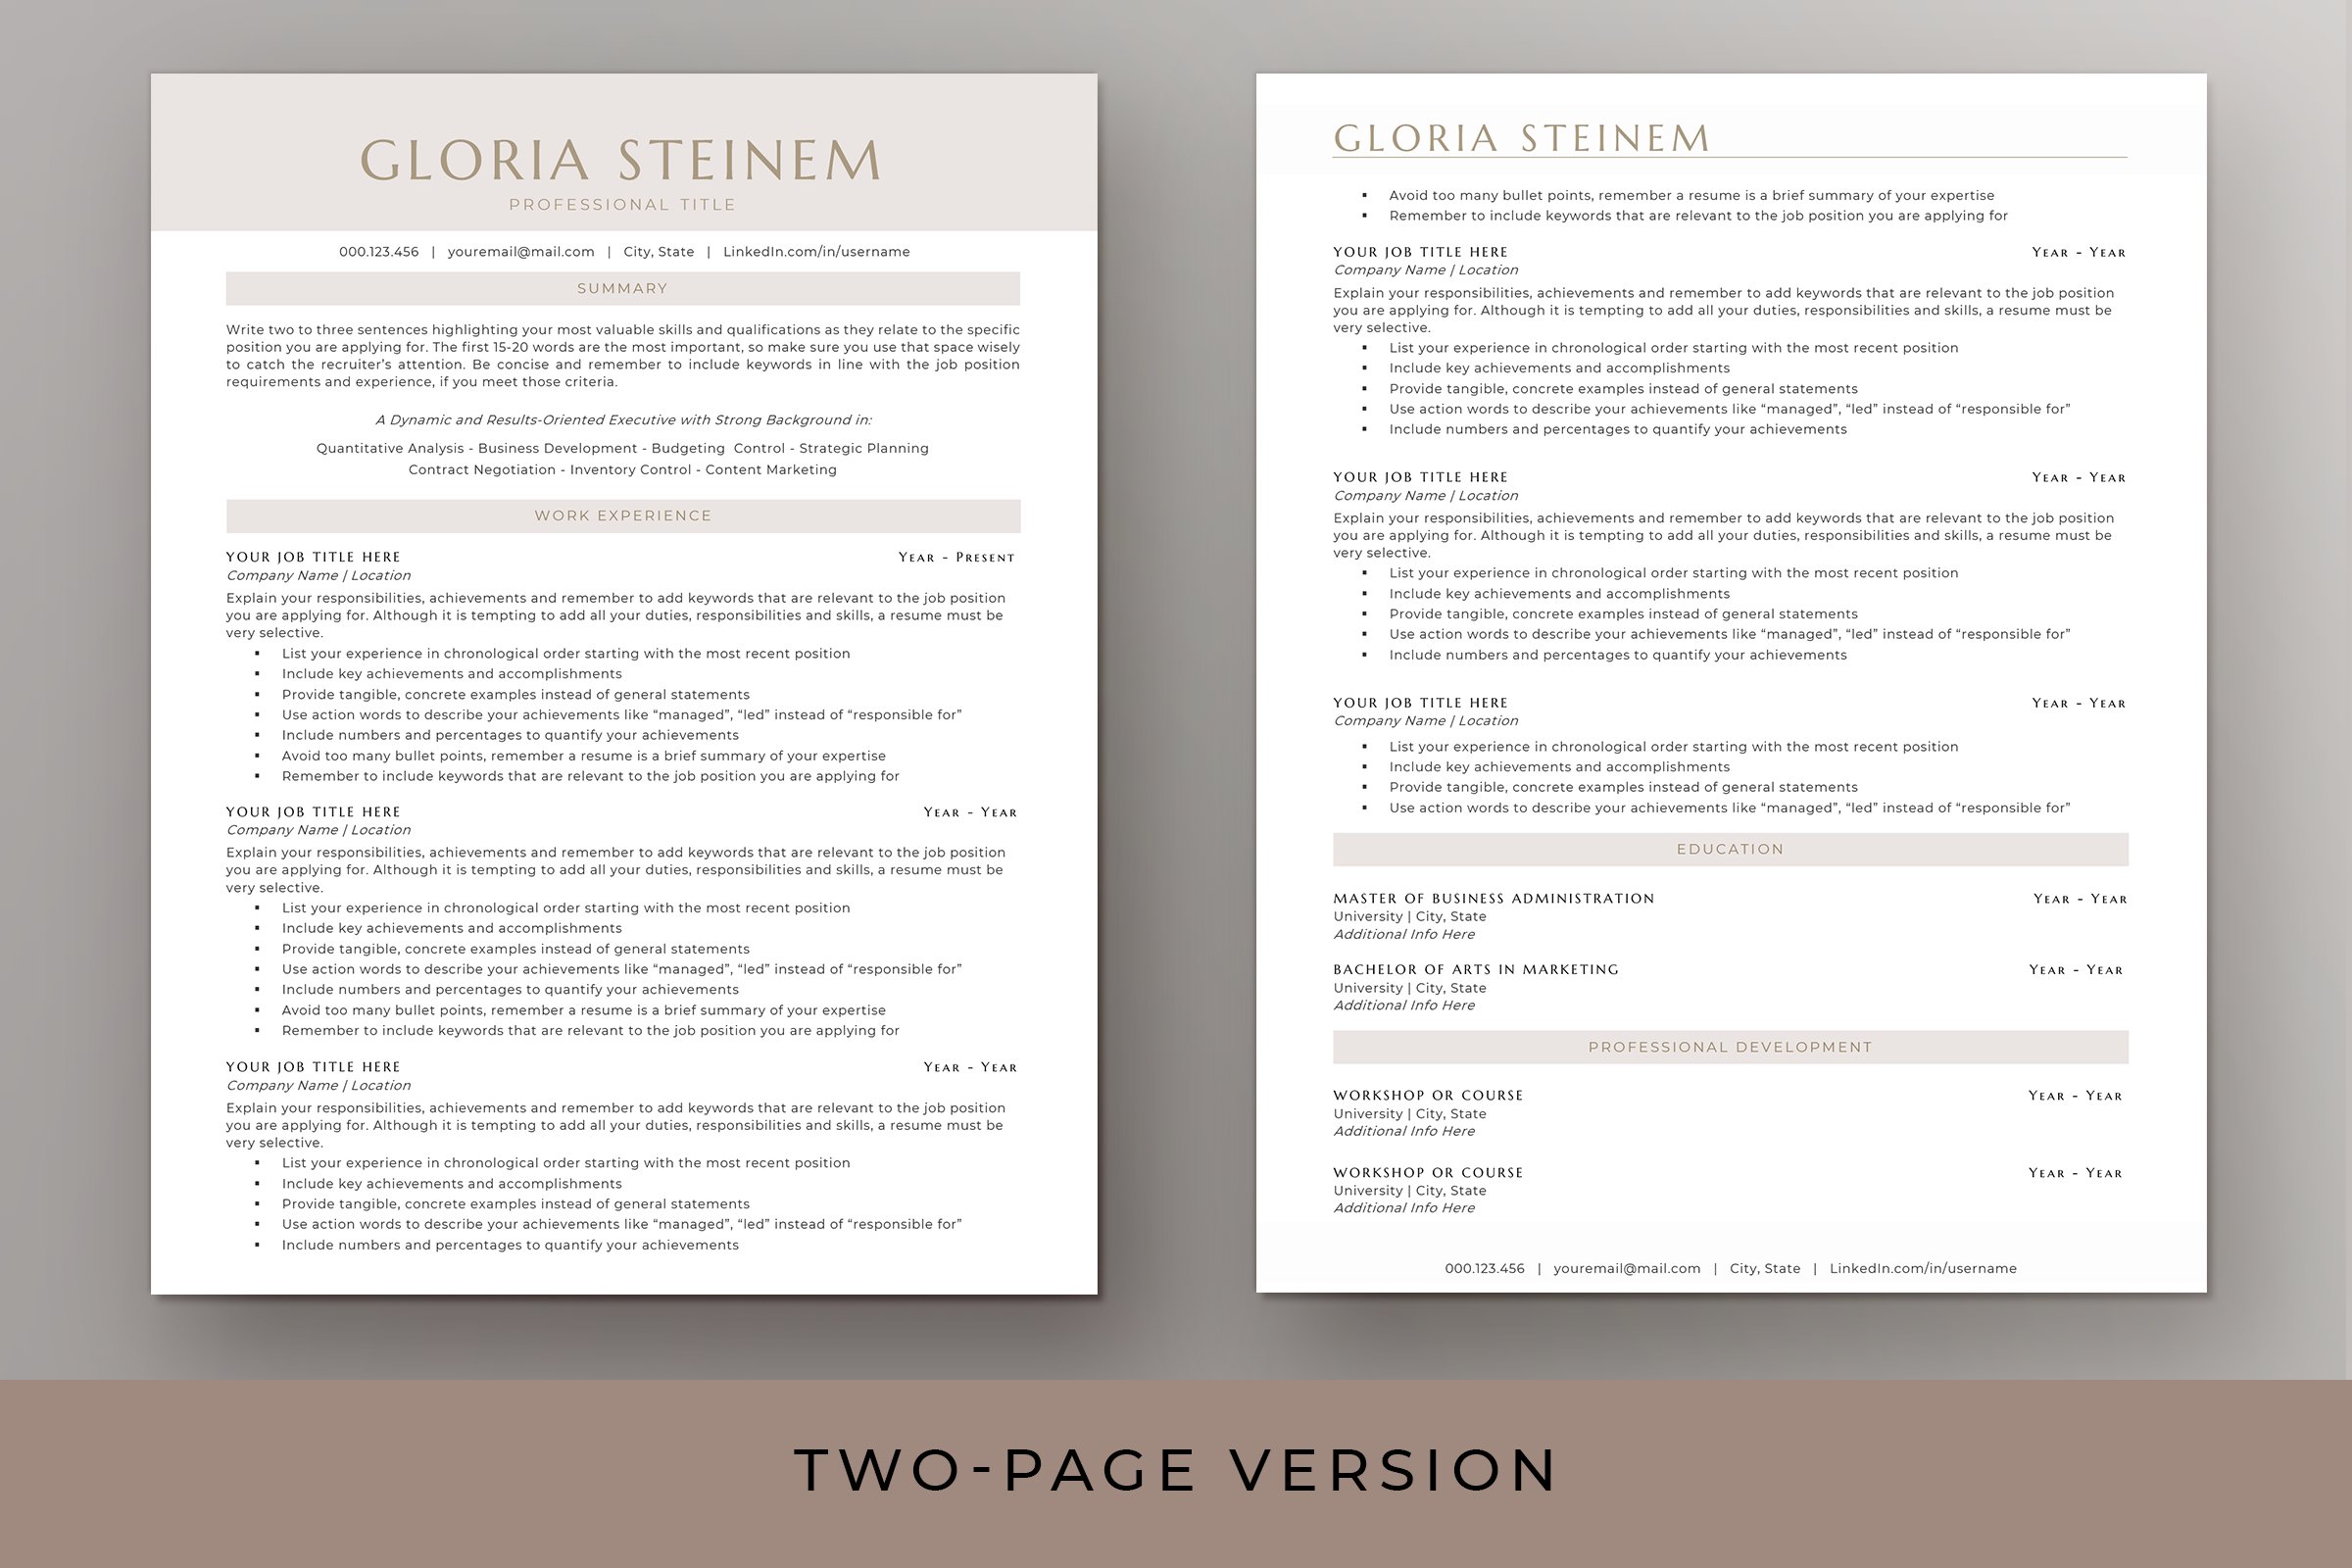 Two page resume template for two pages.